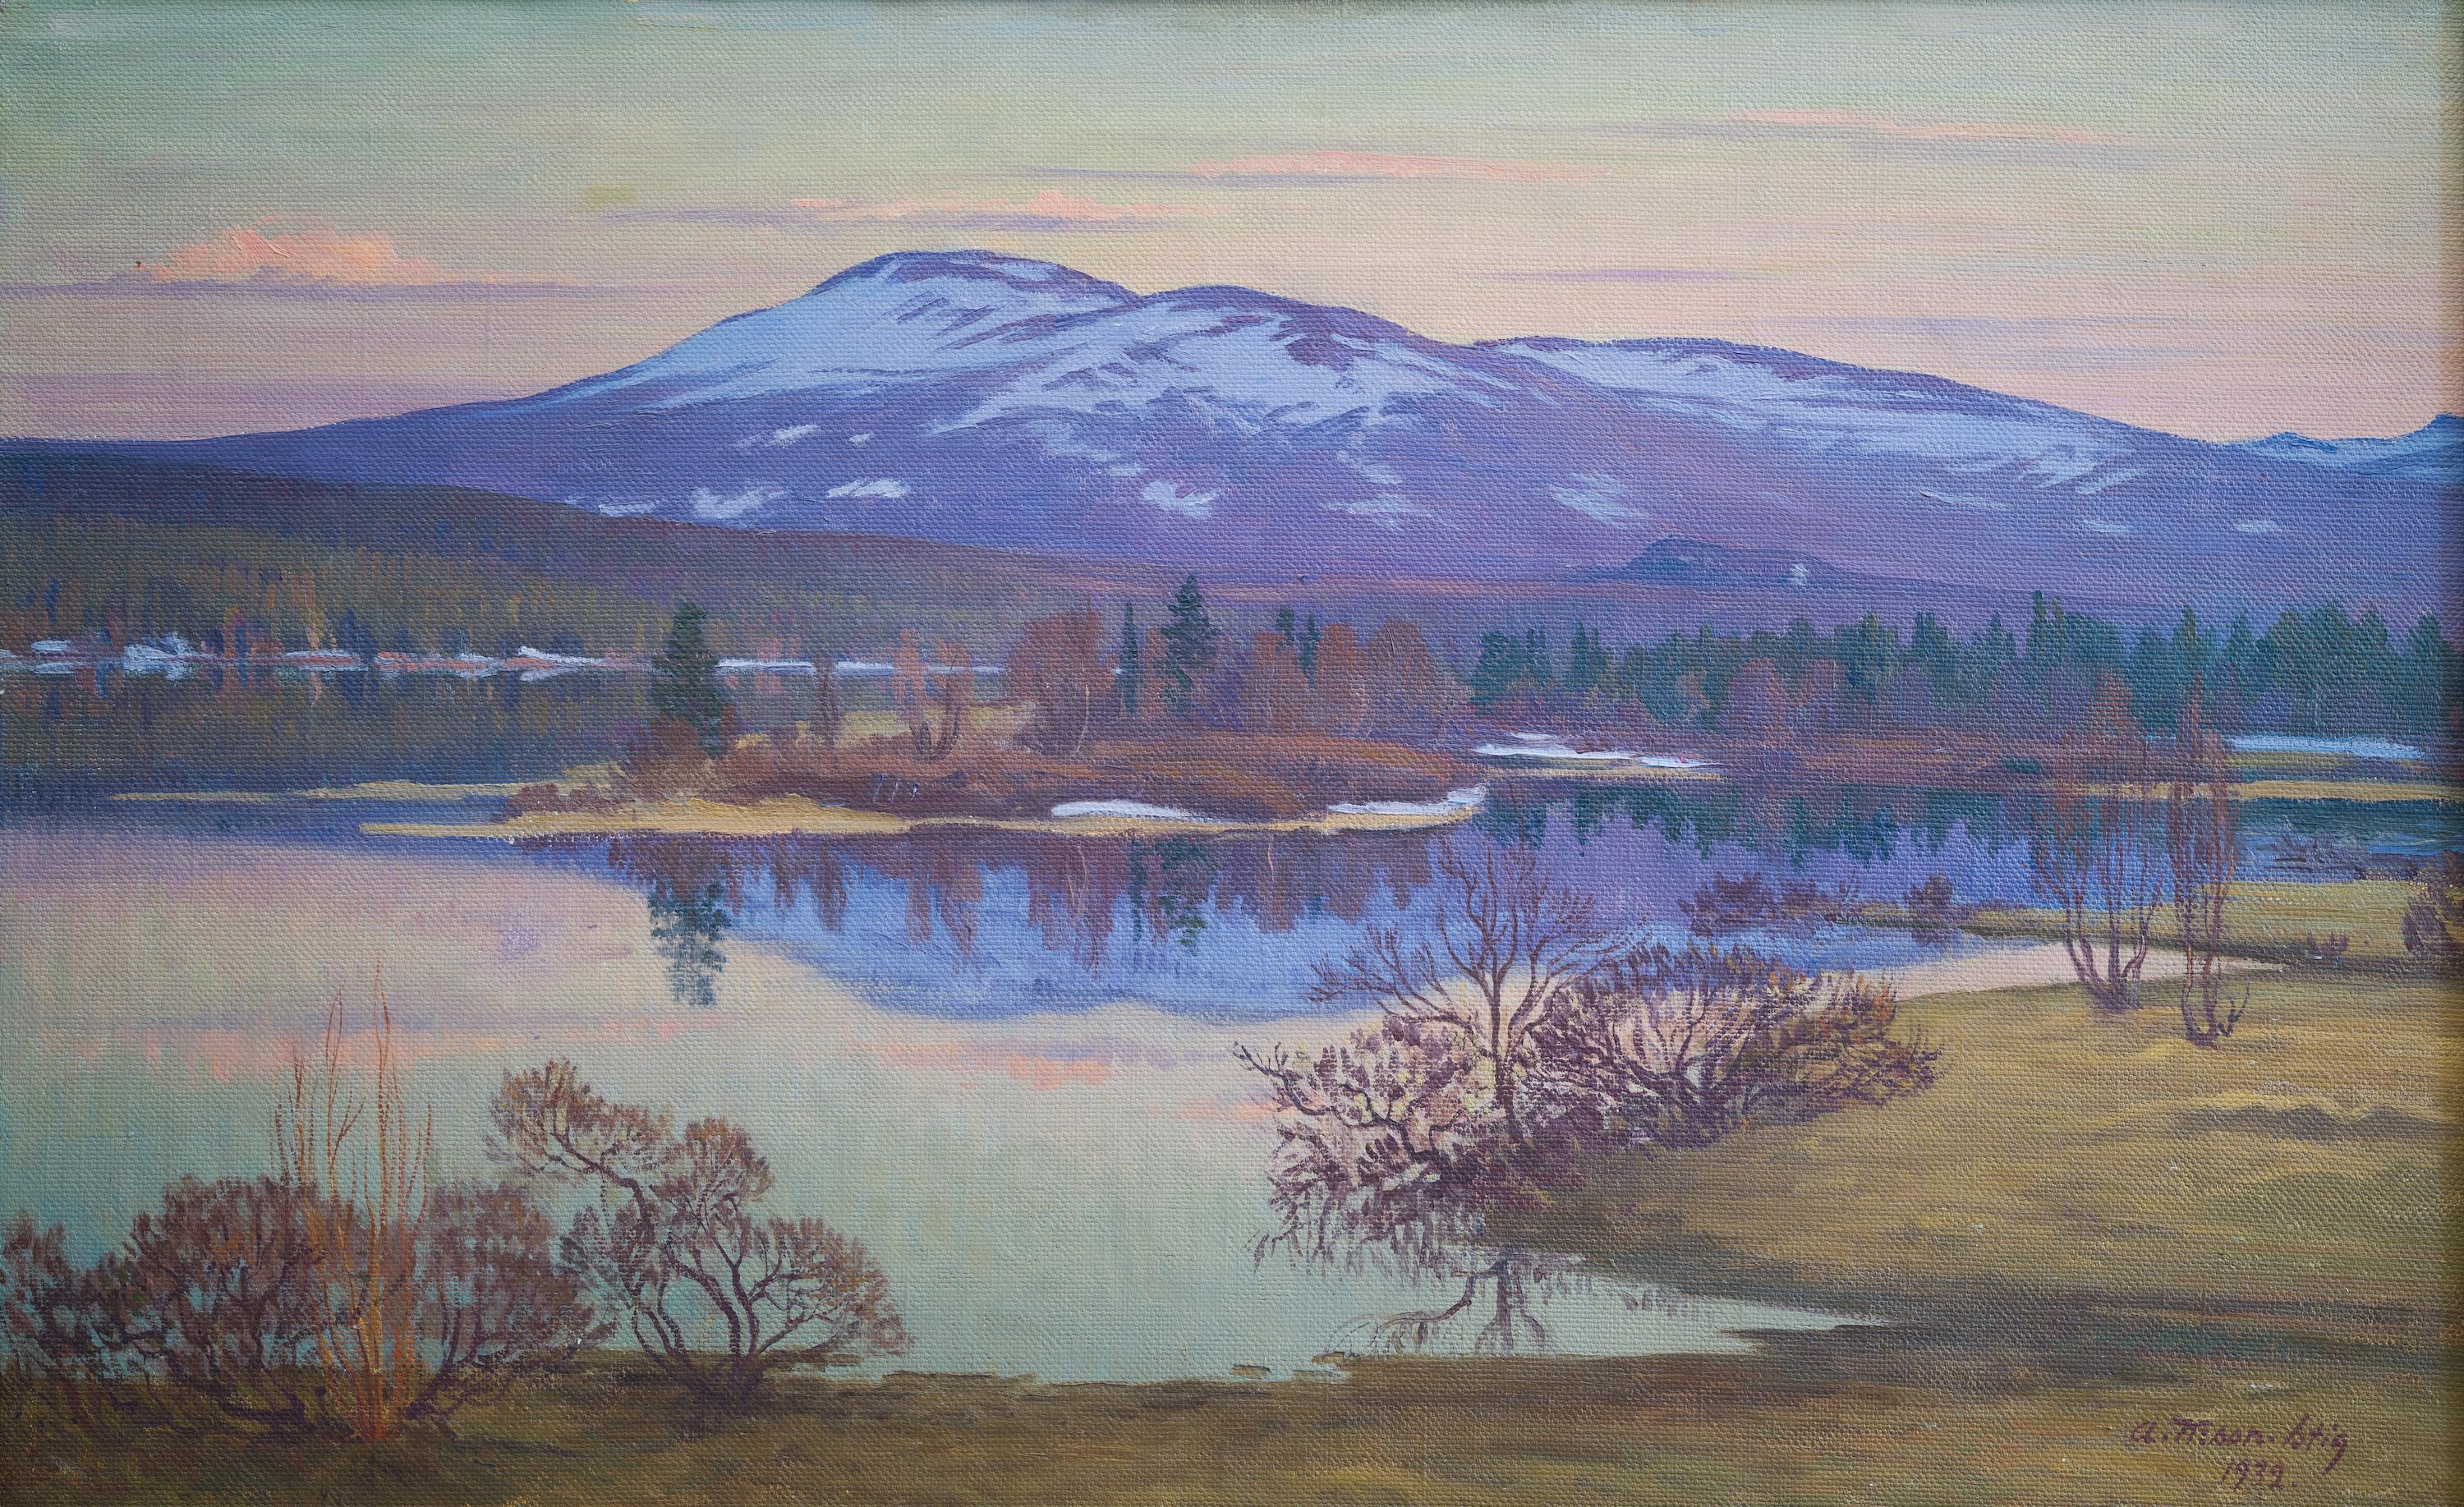 The painting we are selling is a breathtaking mountain view from Hålland in Jämtland, Sweden, created by Ante Karlsson-Stig in 1932. Ante Karlsson-Stig (1885-1967) was a Swedish painter who studied under Henri Matisse in Paris. He was known for his